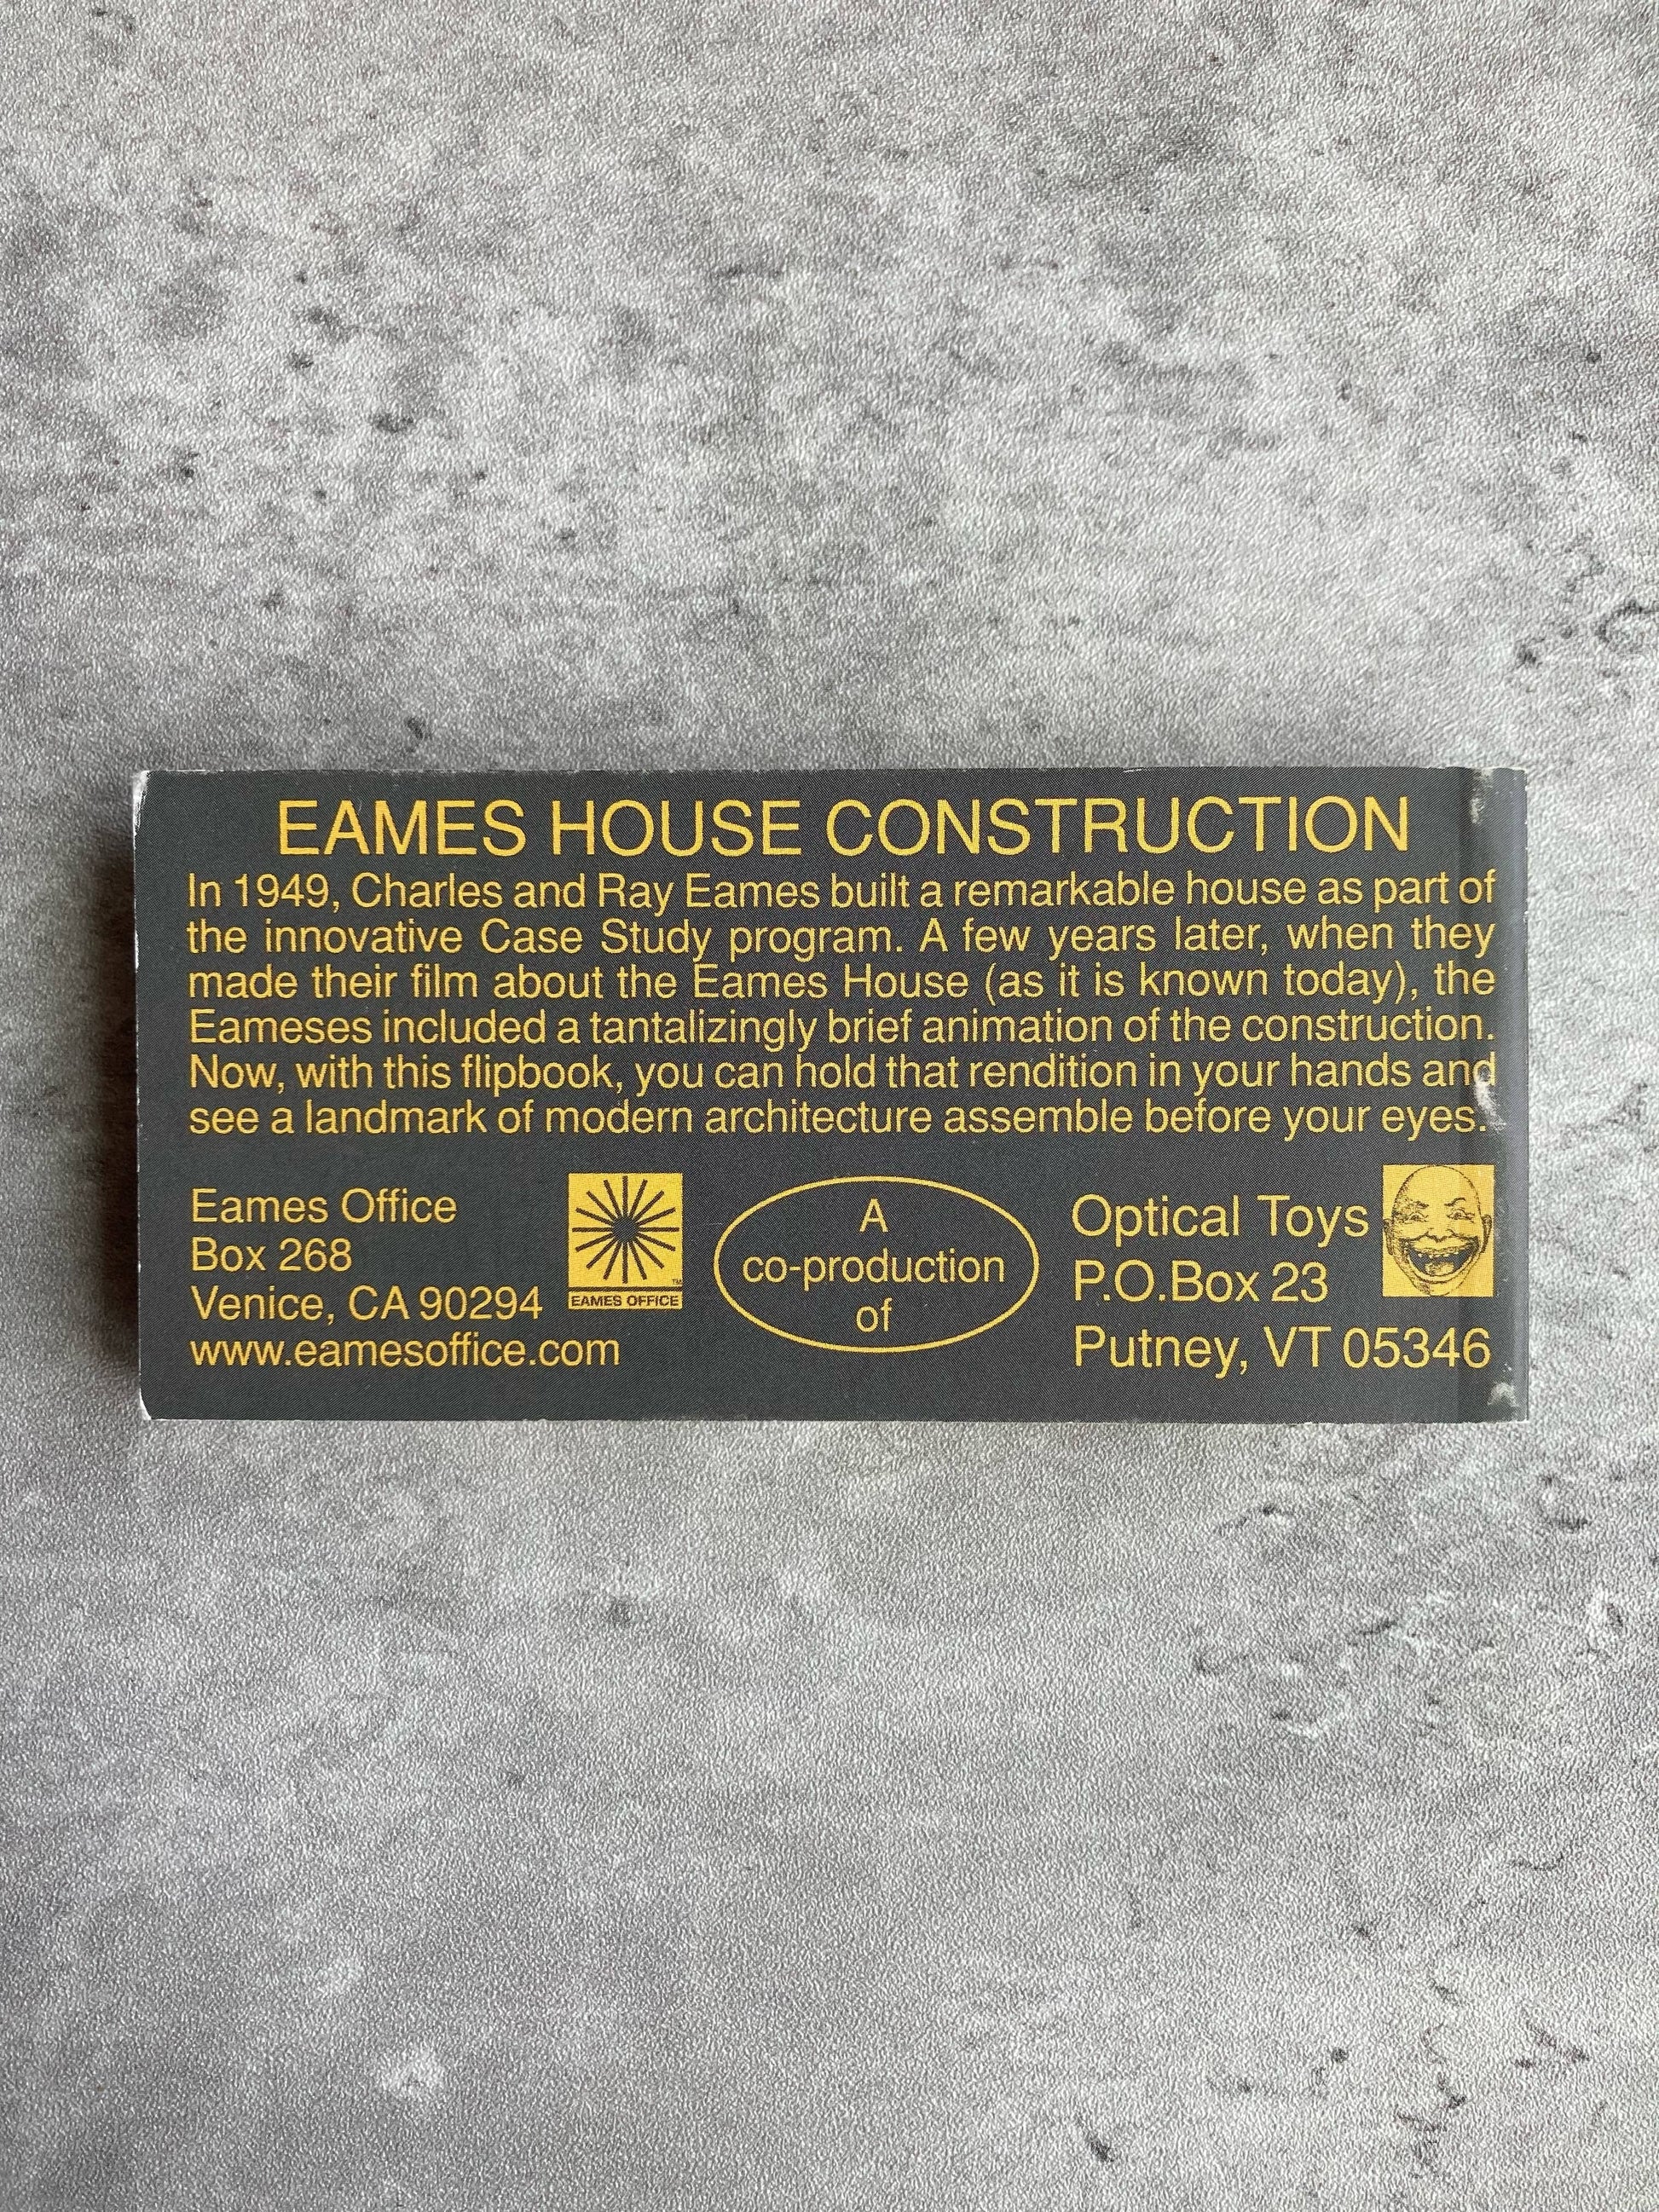 Eames House Construction Flipbook by Charles & Ray Eames. Shop for new and used books with The Stone Circle, the only online bookstore near you. 